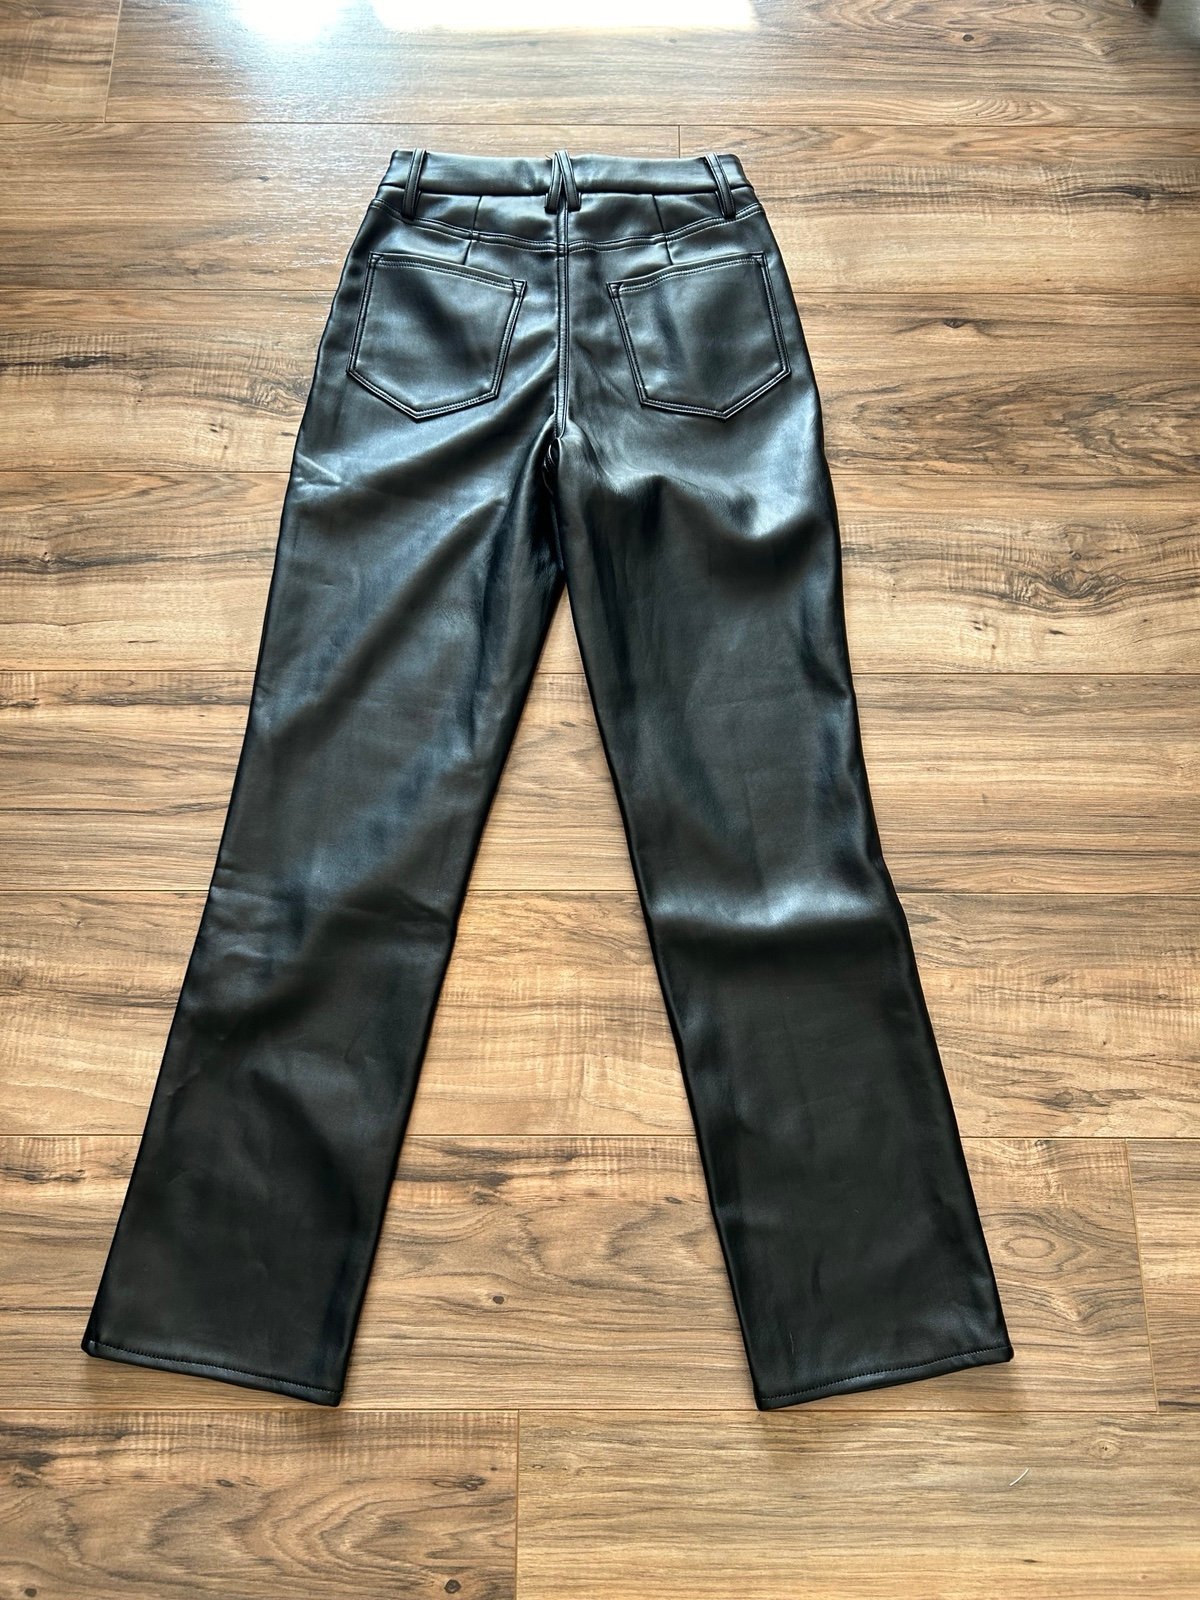 Cheap GOOD AMERICAN - NWOT - GOOD ICON FAUX LEATHER PANTS - size 8 LYdjKopE0 New Style